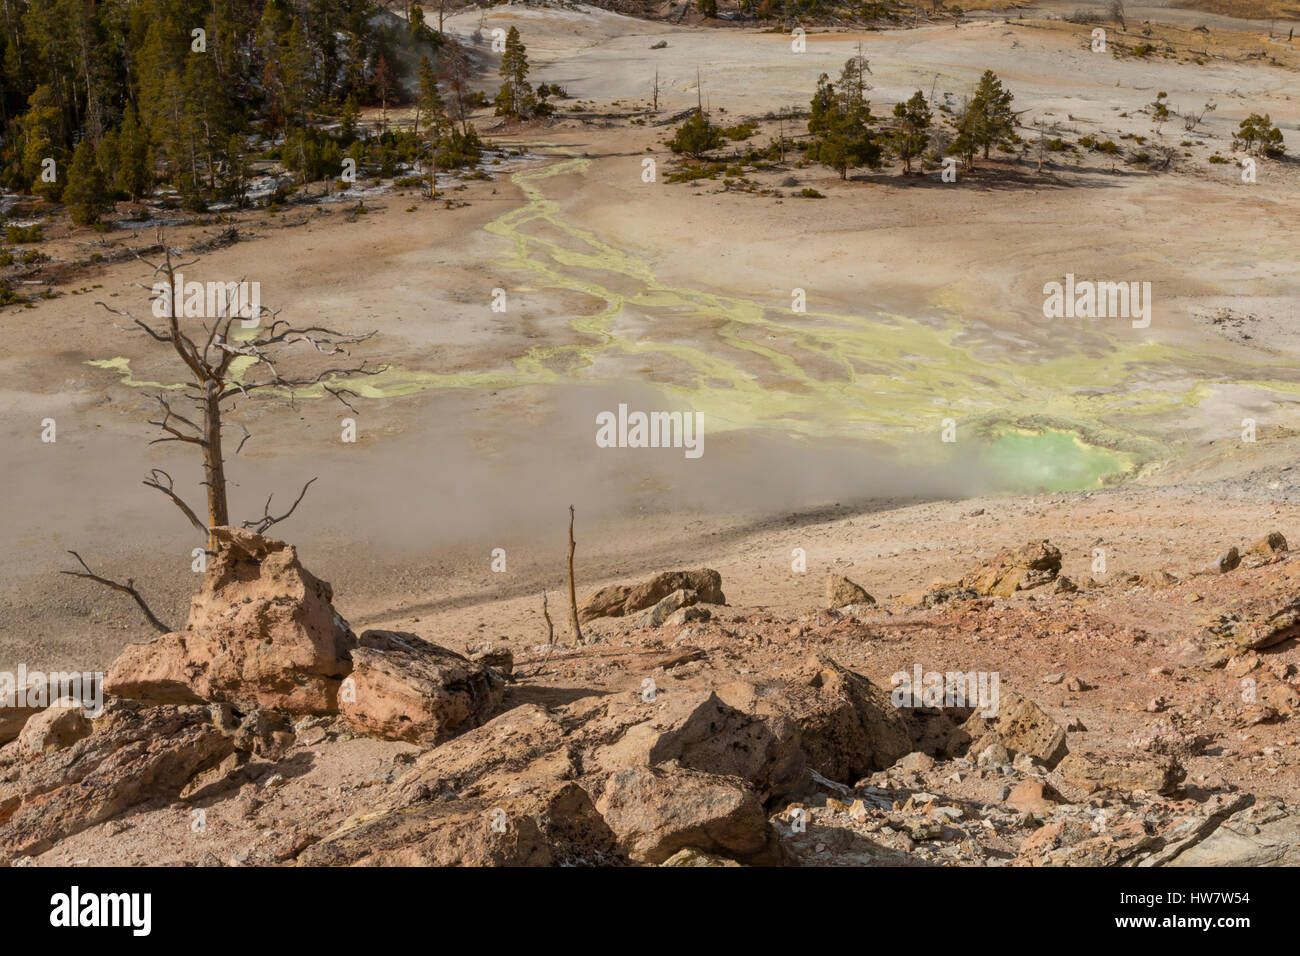 Large acidic hot spring in the backcountry of Yellowstone National Park, Wyoming. Stock Photo